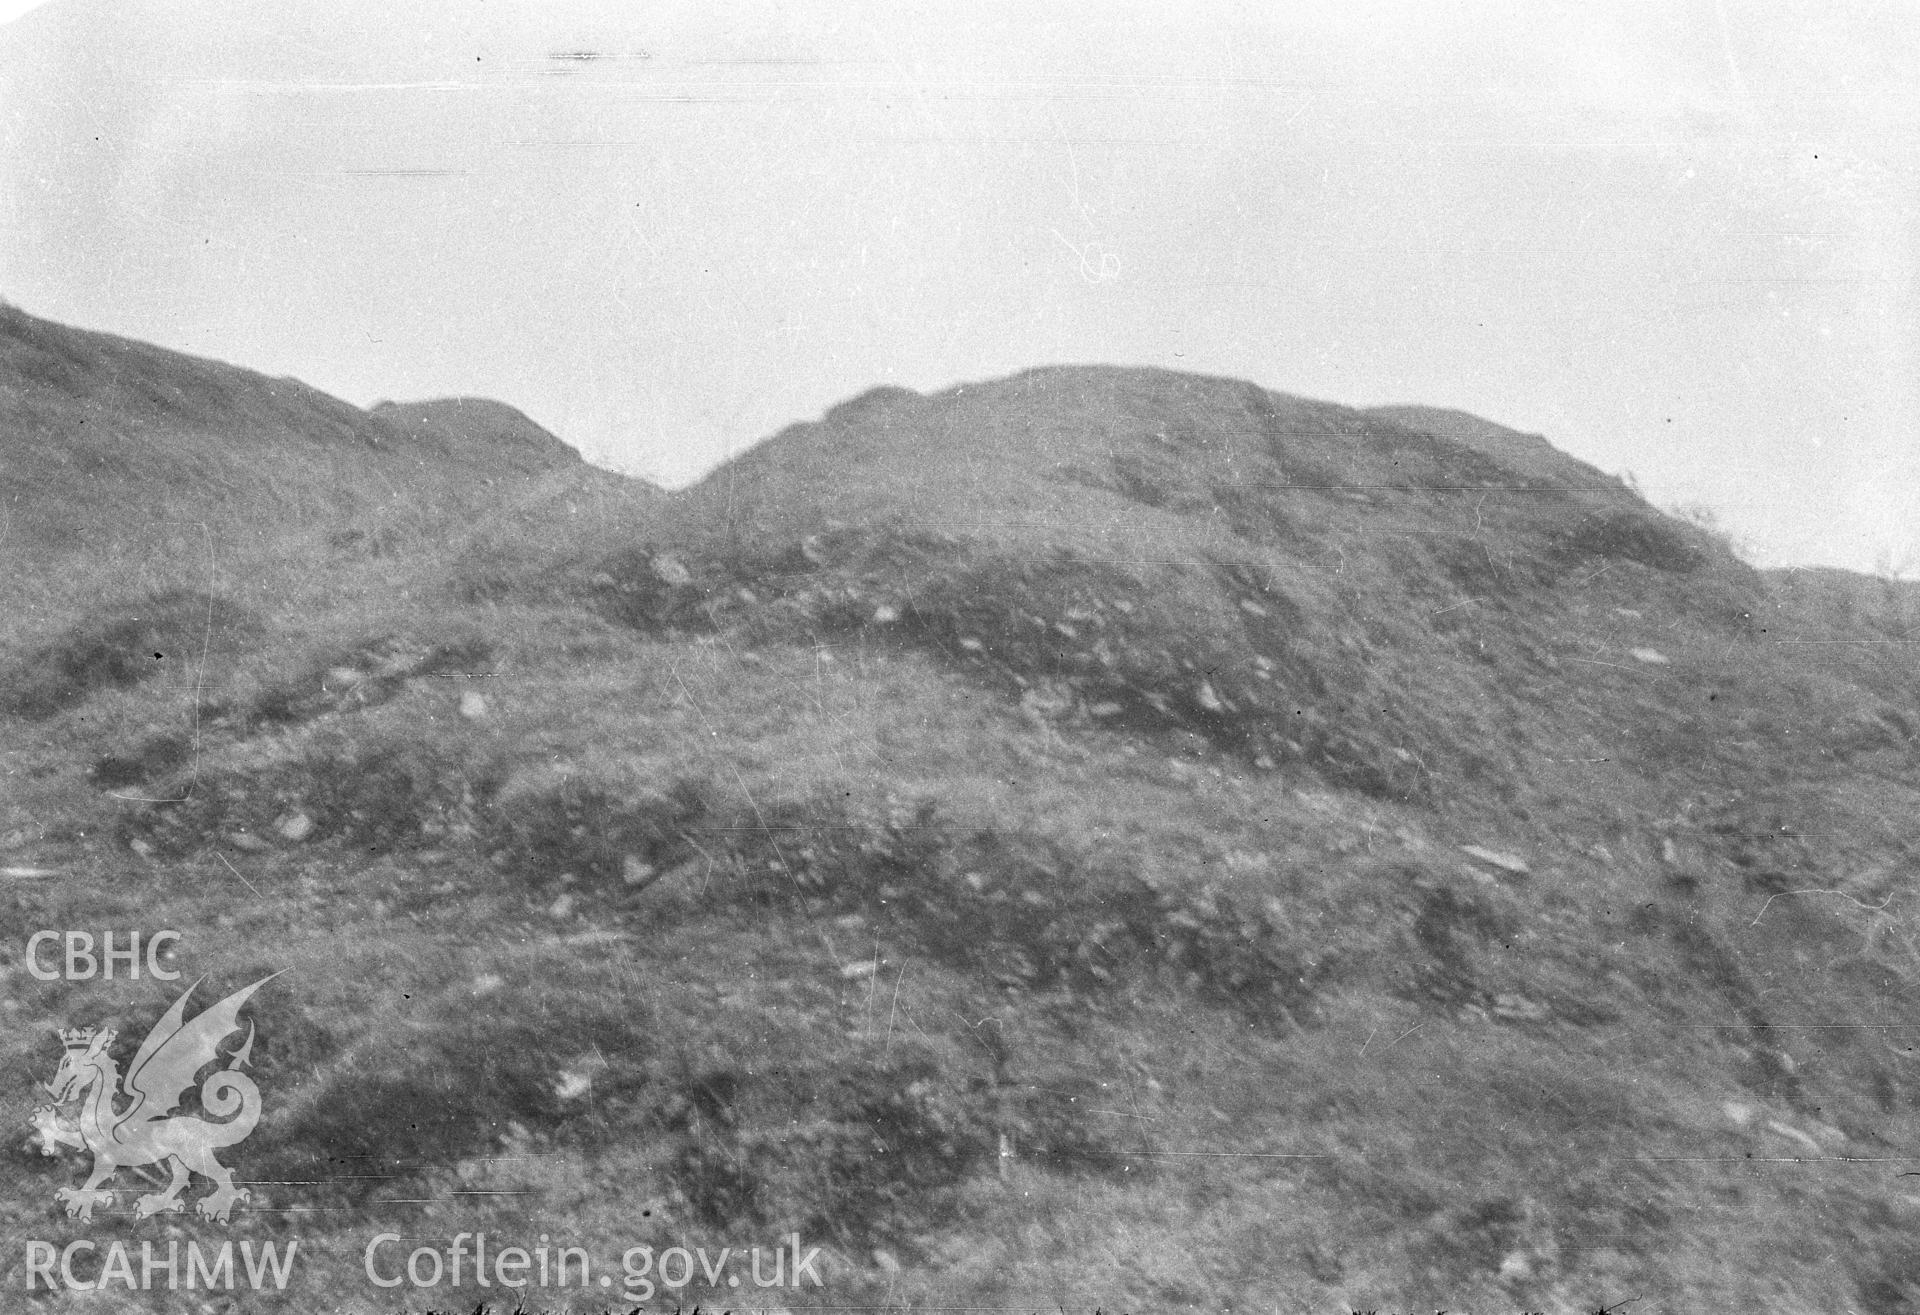 Digital copy of a nitrate negative showing view of Castell Grogwynion.